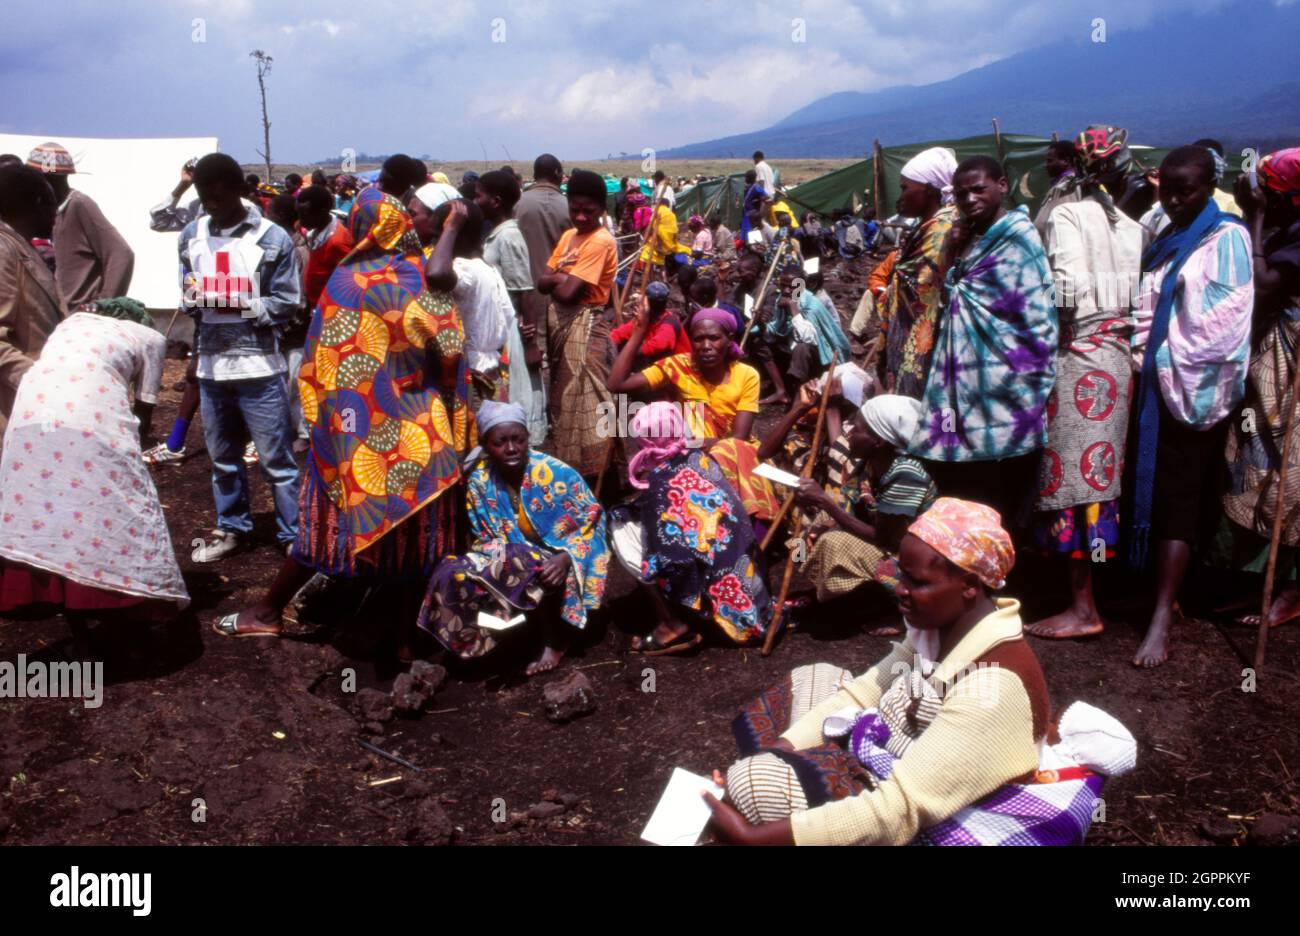 Rwandan refugees fleeing from the genocide and civil war in neighbouring Rwanda wait in a refugee camp in Goma in the Democratic Republic of Congo. Stock Photo